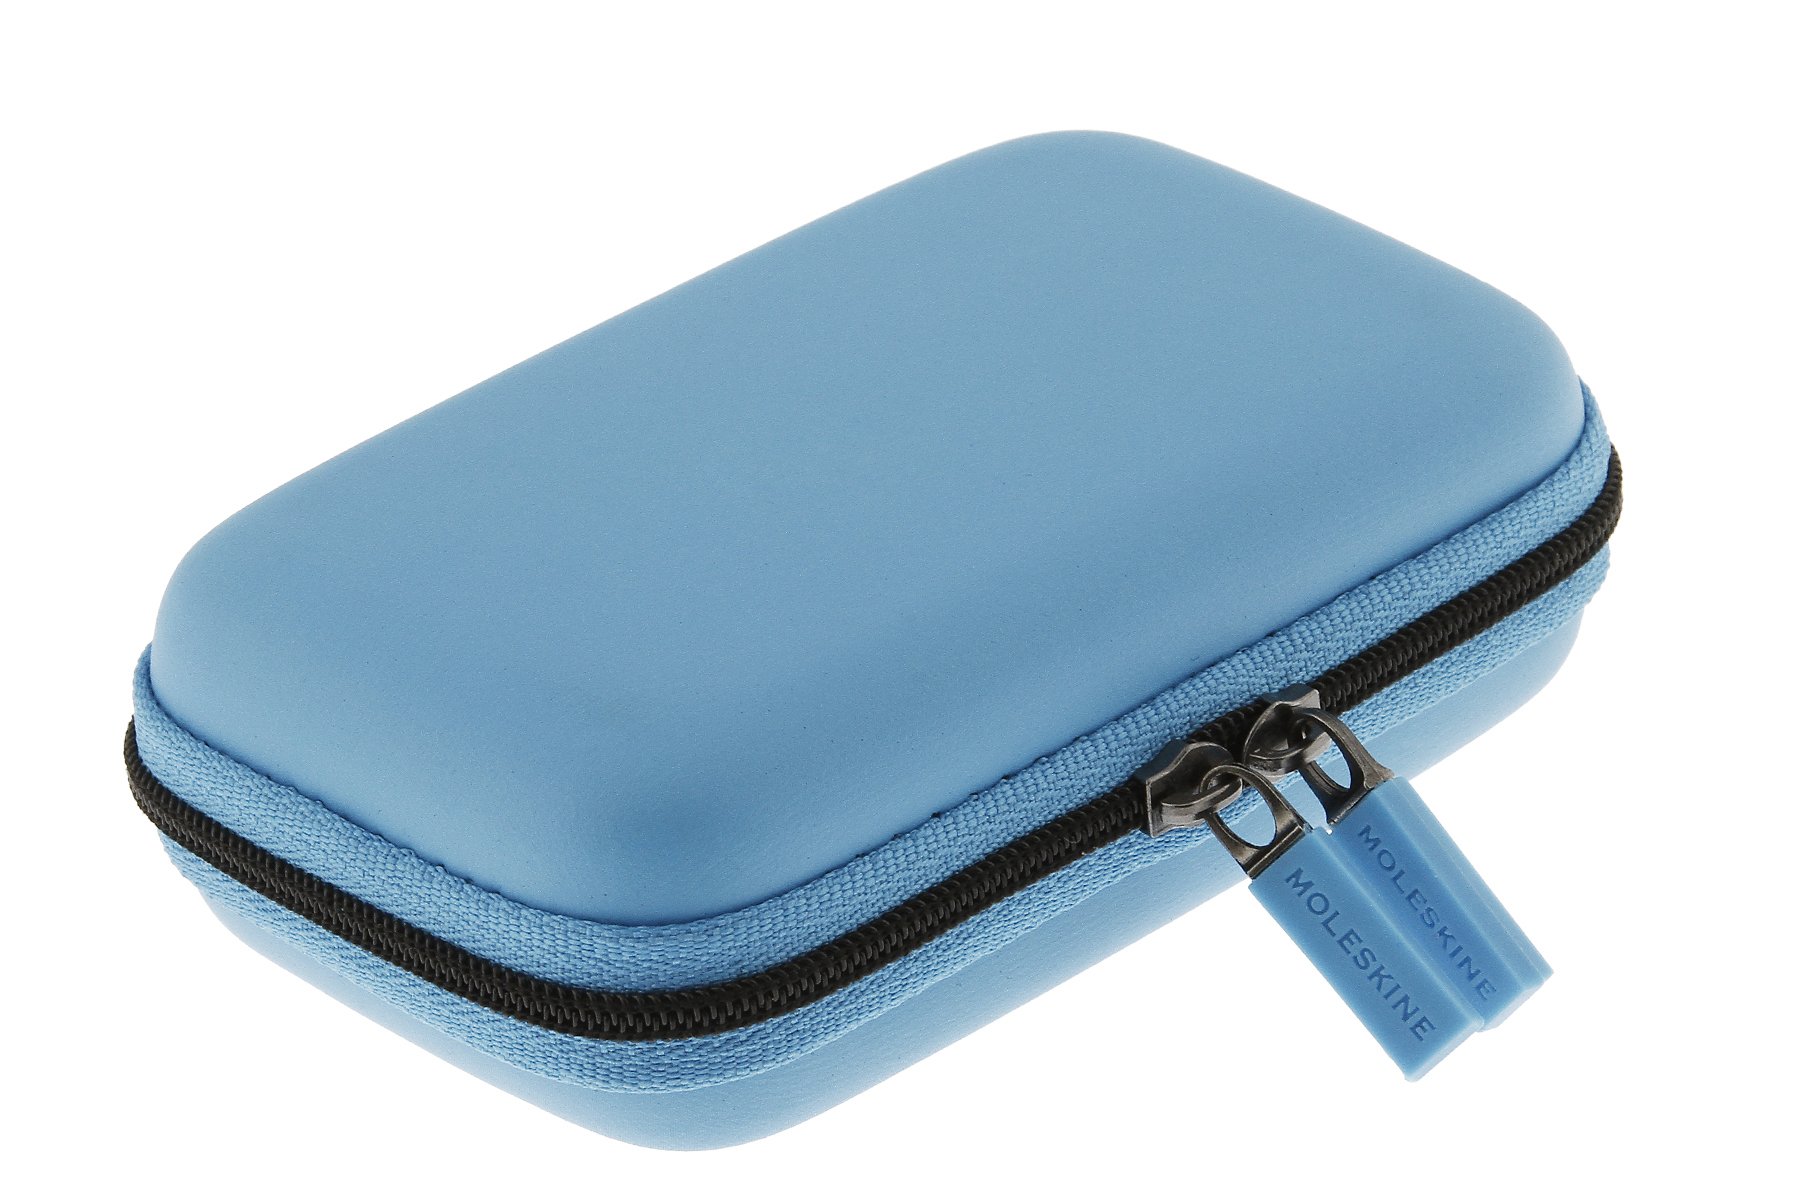 Moleskine Shell Case, Extra Small, Cerulean Blue (2.75 x 4.25 x 1.5) (Travel Collection)